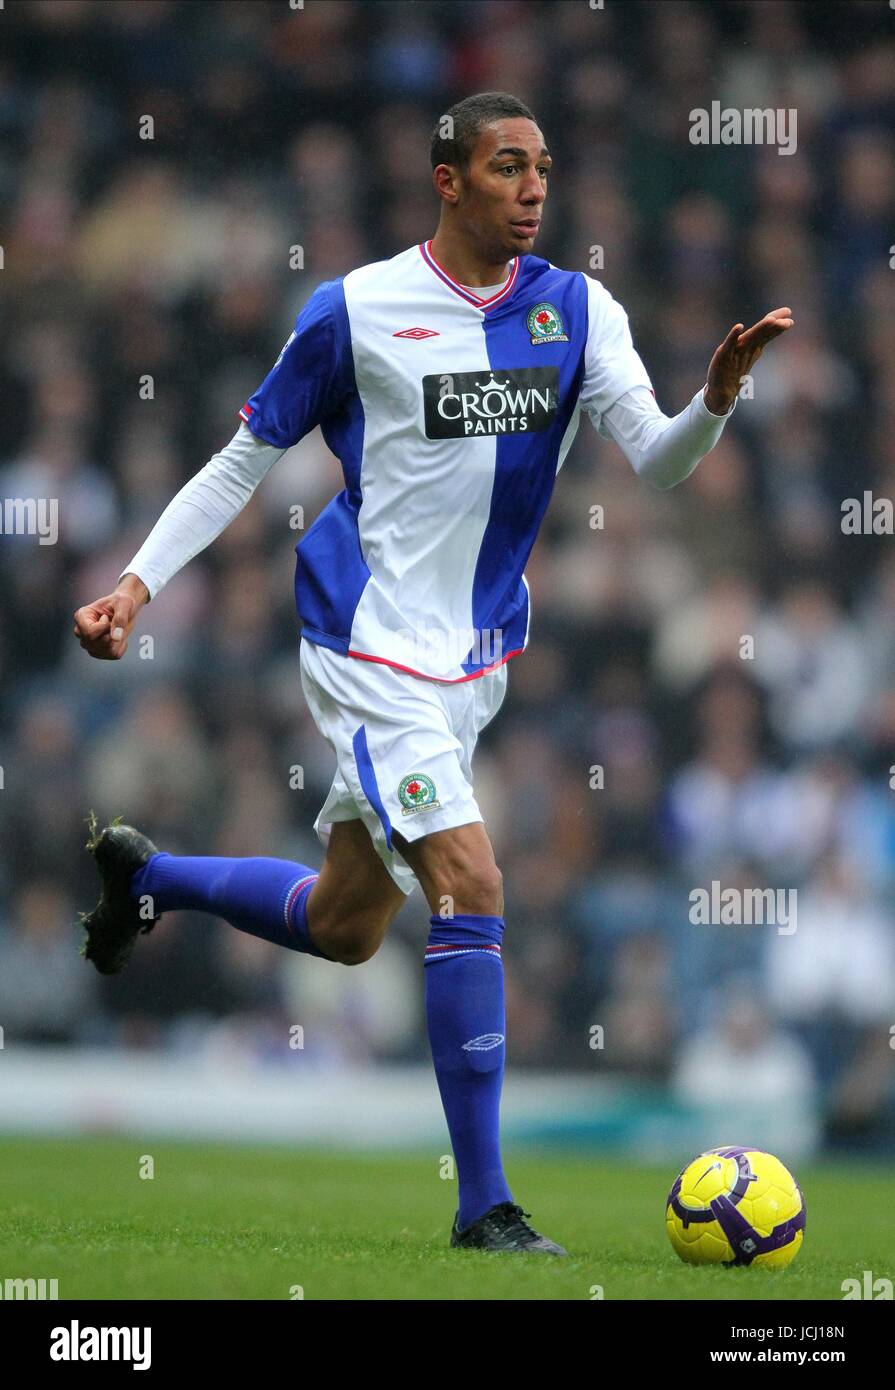 STEVEN NZONZI BLACKBURN ROVERS FC BLACKBURN ROVERS V TOTTENHAM EWOOD PARK, BLACKBURN, ENGLAND 19 December 2009 GAB6523     WARNING! This Photograph May Only Be Used For Newspaper And/Or Magazine Editorial Purposes. May Not Be Used For, Internet/Online Usage Nor For Publications Involving 1 player, 1 Club Or 1 Competition, Without Written Authorisation From Football DataCo Ltd. For Any Queries, Please Contact Football DataCo Ltd on +44 (0) 207 864 9121 Stock Photo